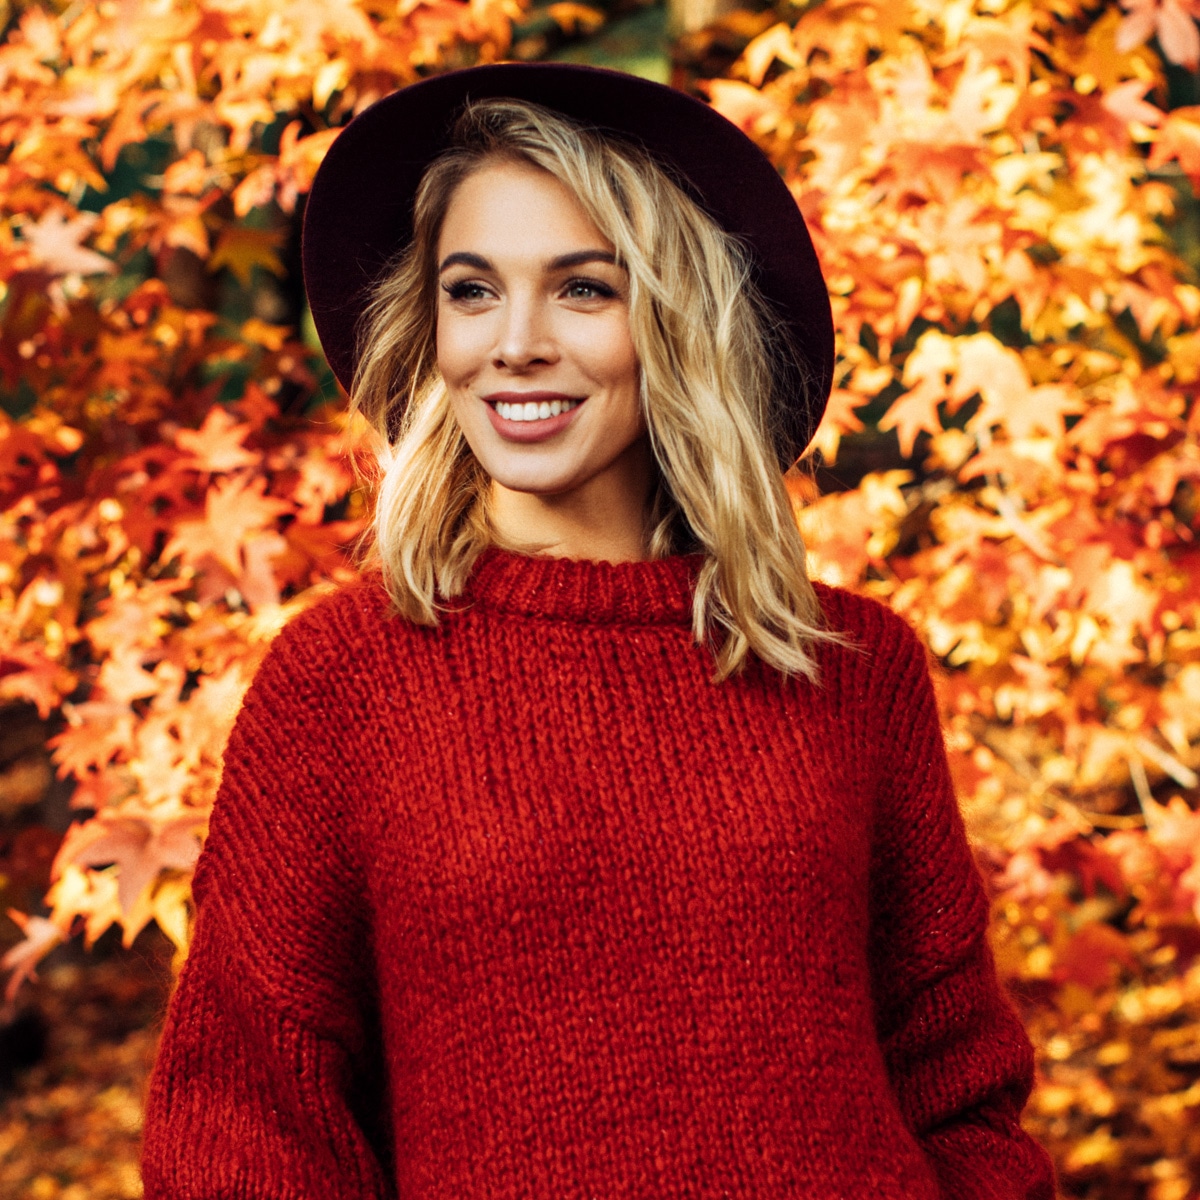 Where to Buy Cozy, Cute & Affordable Sweaters for Fall